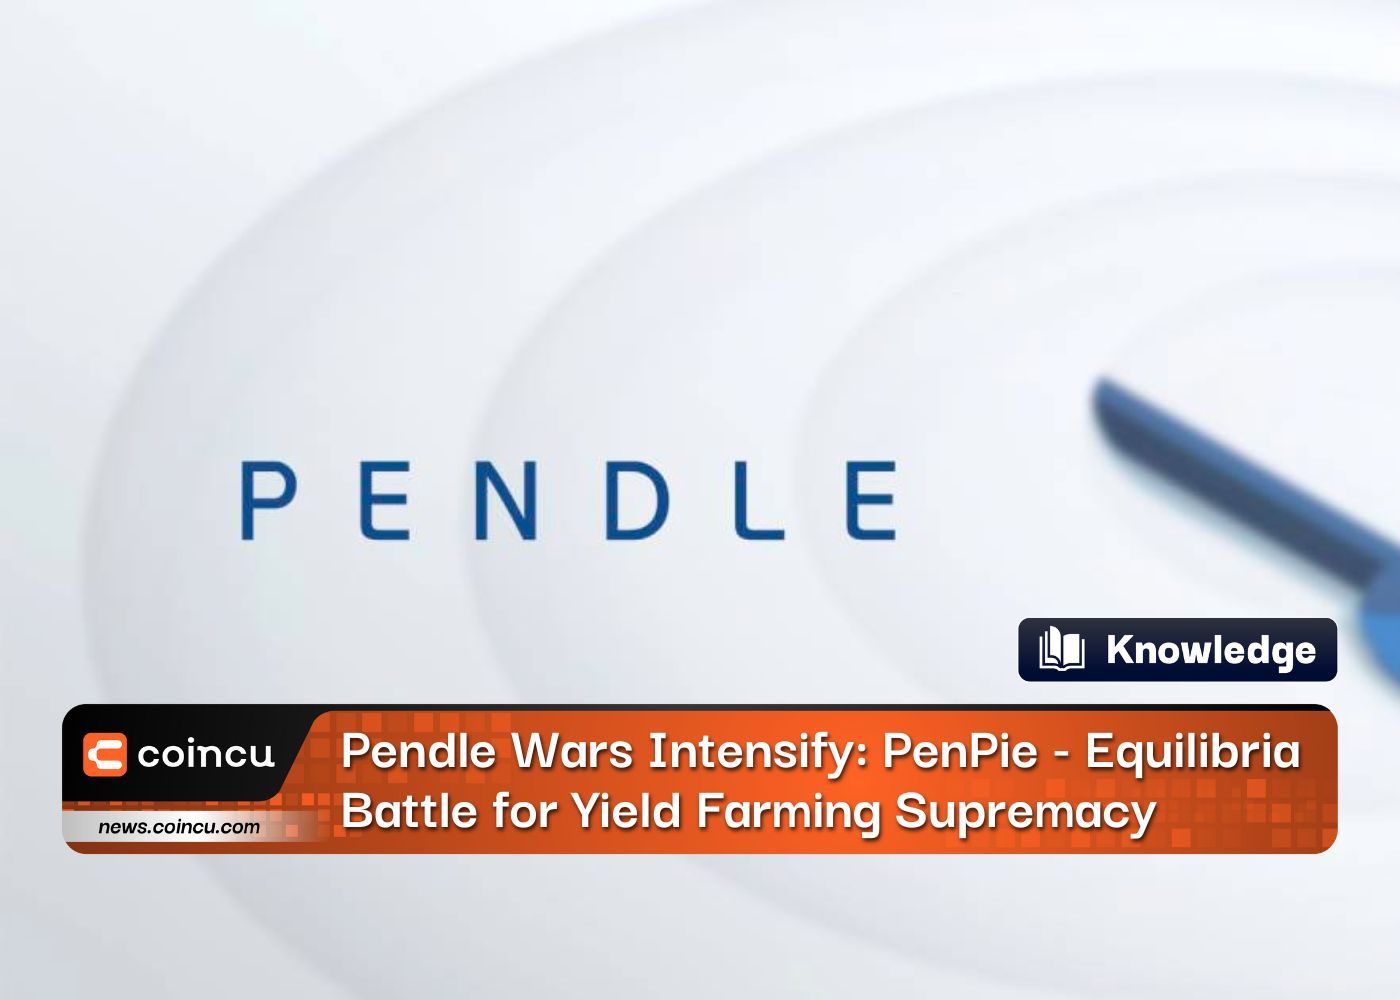 Pendle War Intensify: PenPie And Equilibria Battle for Yield Farming Supremacy